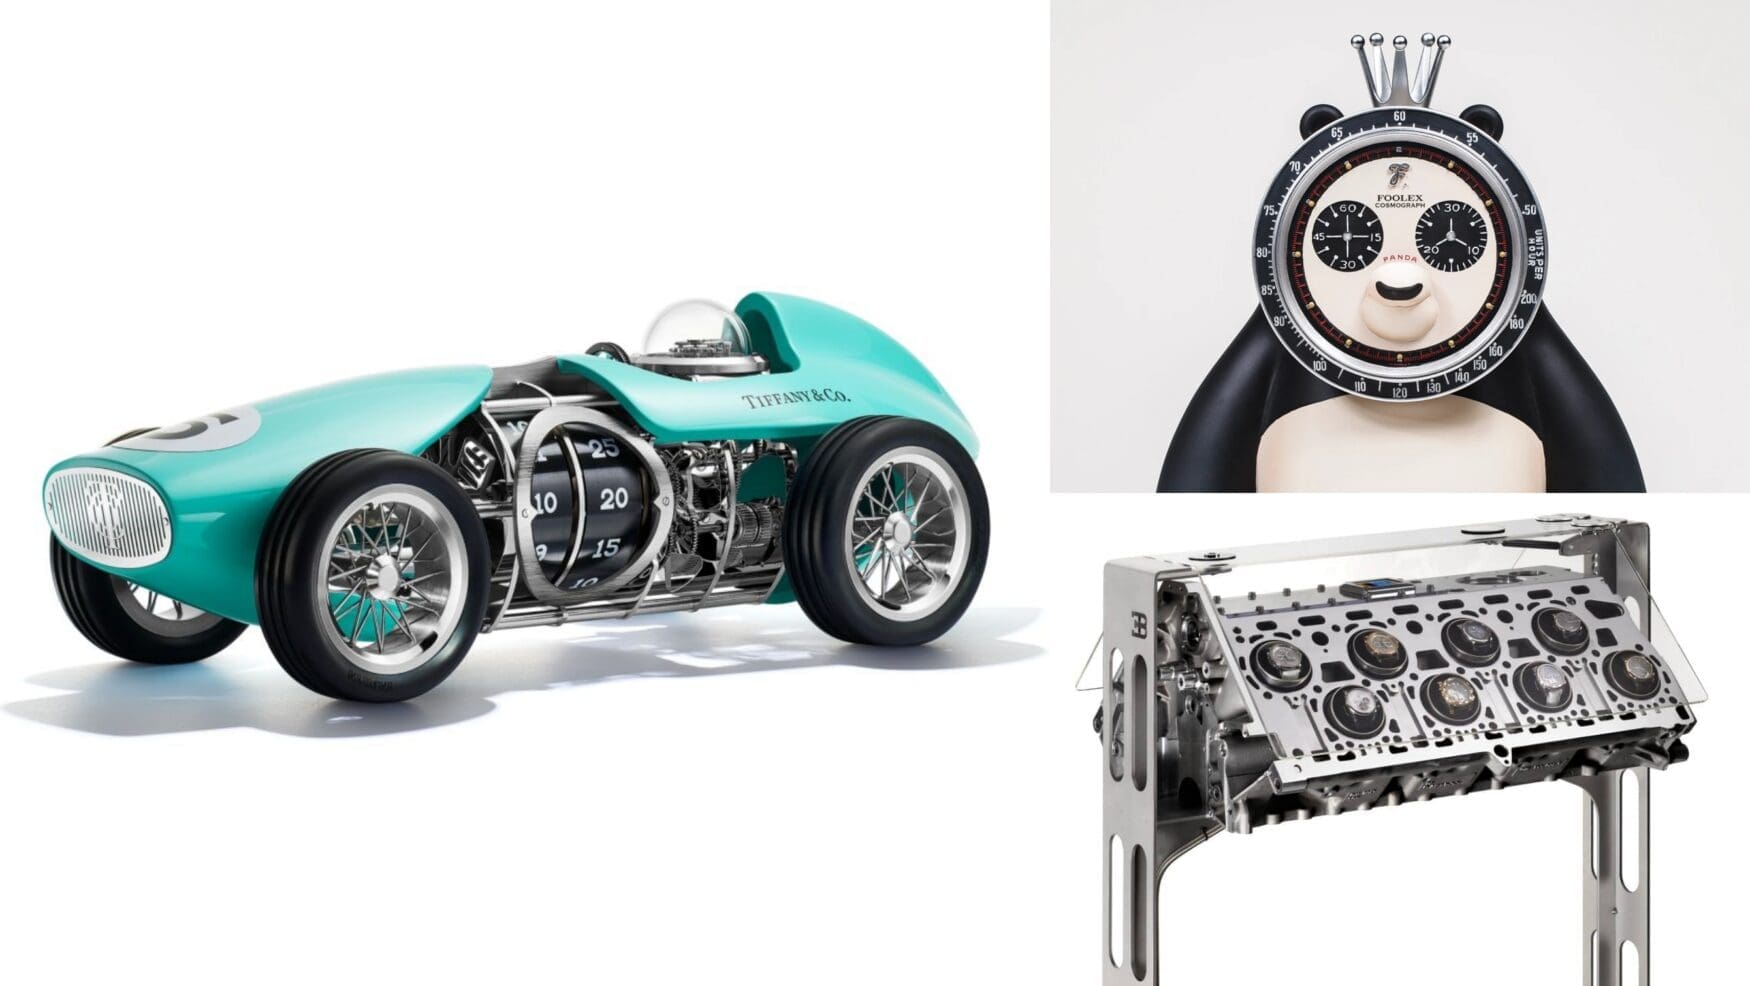 The 5 most outrageous Father’s Day gifts for watch loving fathers